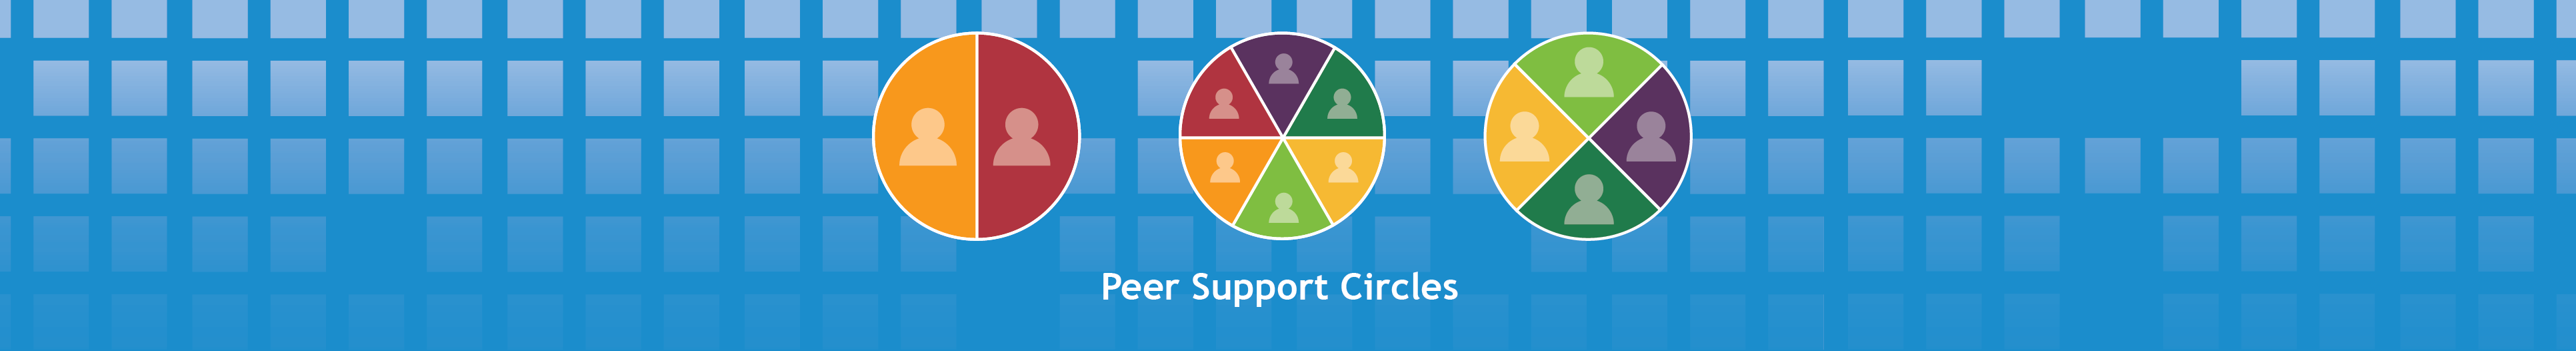 Peer Support Circles